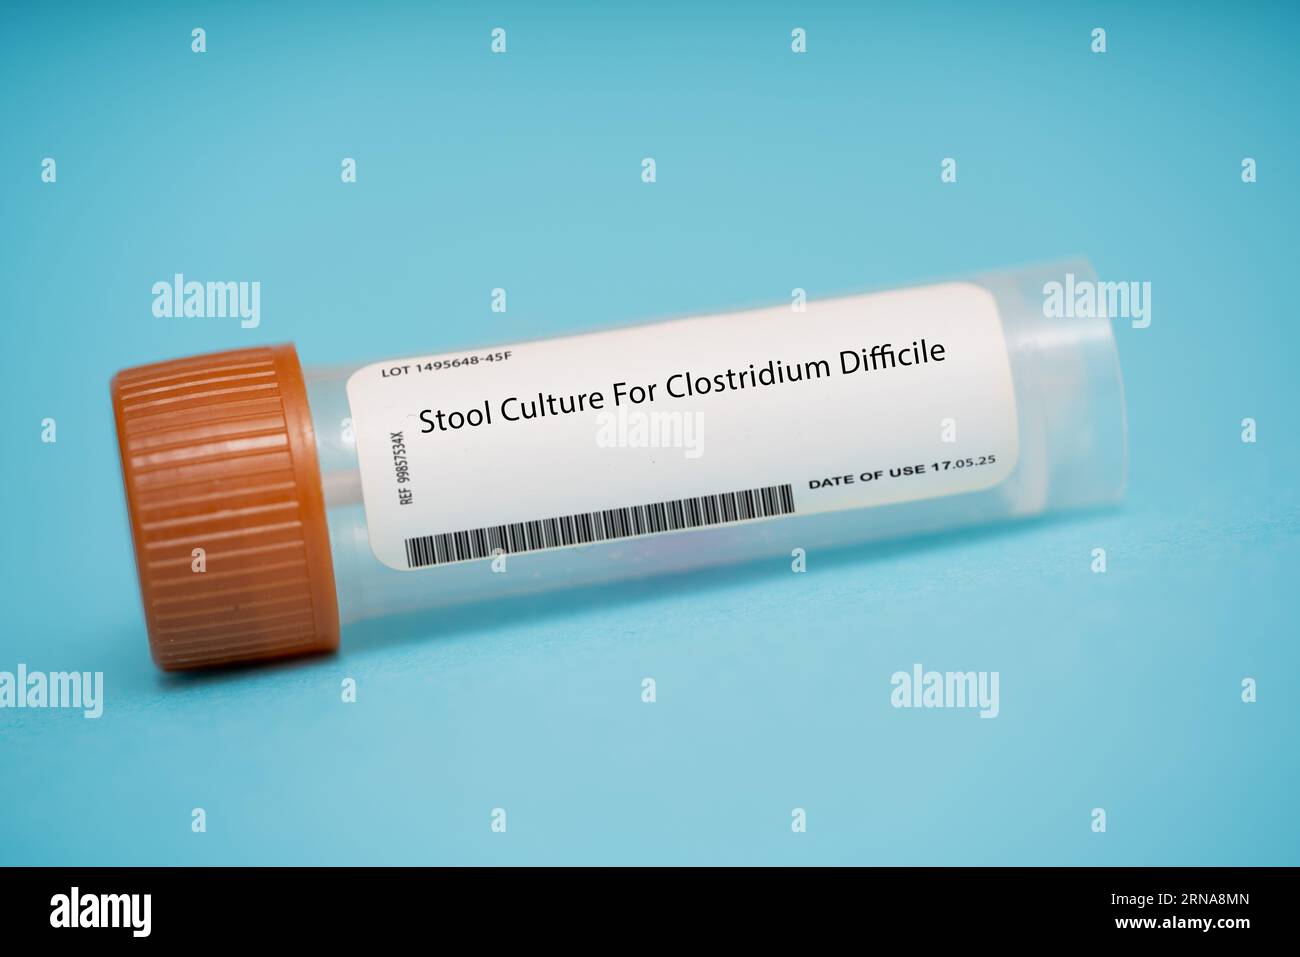 Stool Culture For Clostridium Difficile This test is used to identify the presence of the bacteria Clostridium difficile in the stool, which can cause Stock Photo